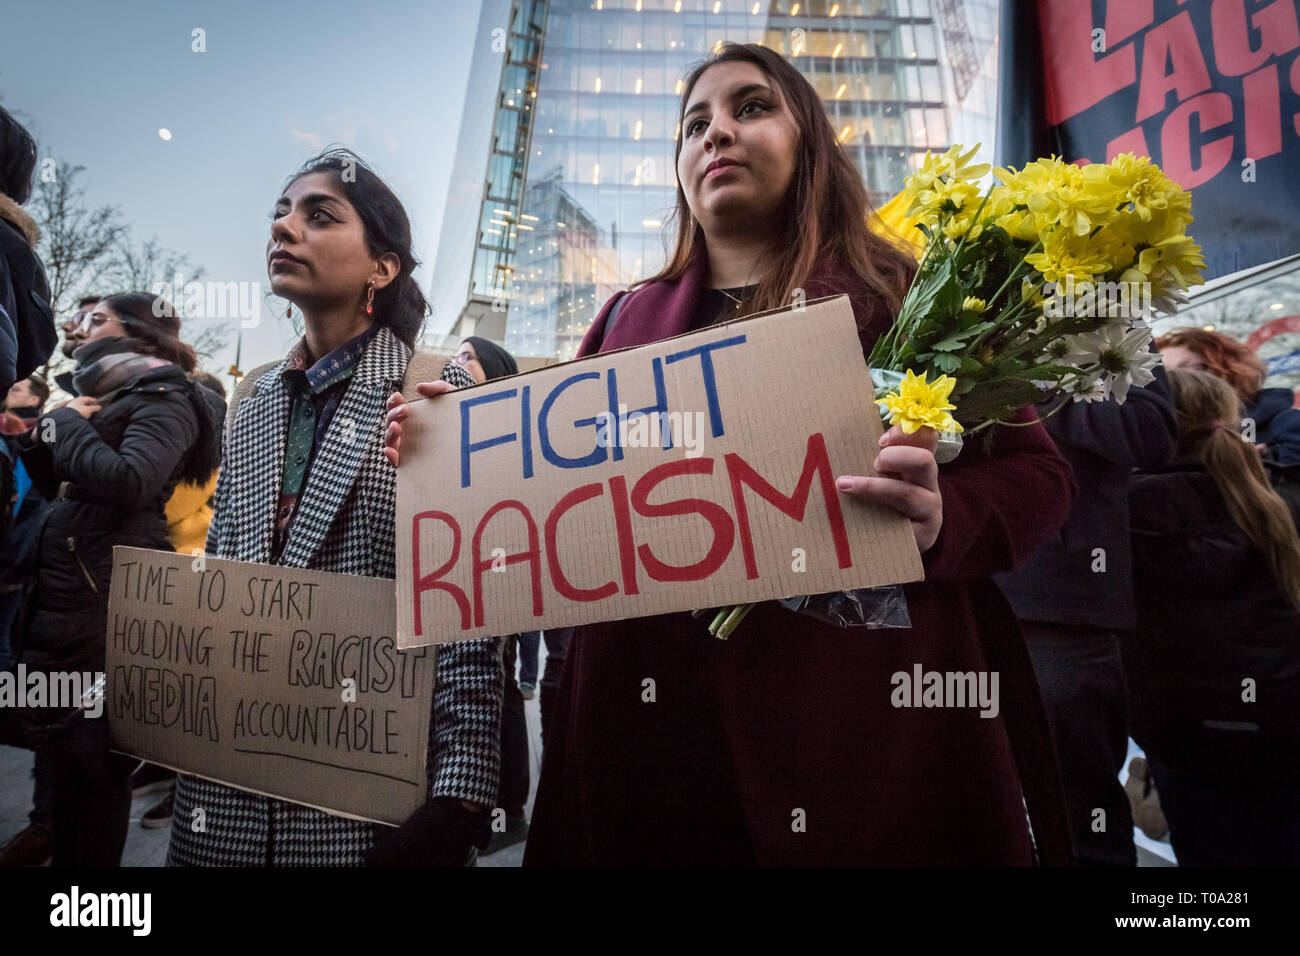 London, UK. 18th March, 2019. Vigil and solidarity demo with Christchurch NZ mosque attack victims outside News UK offices. Anti-racism protesters gather in London Bridge opposite the offices of News UK, the headquarters of Rupert Murdoch’s News Corp. The protesters claim that on-going attacks on Muslim communities world-wide aren't random but a consequence of growing right-wing politics fuelled by global media platforms such as News Corp publications. Credit: Guy Corbishley/Alamy Live News Stock Photo